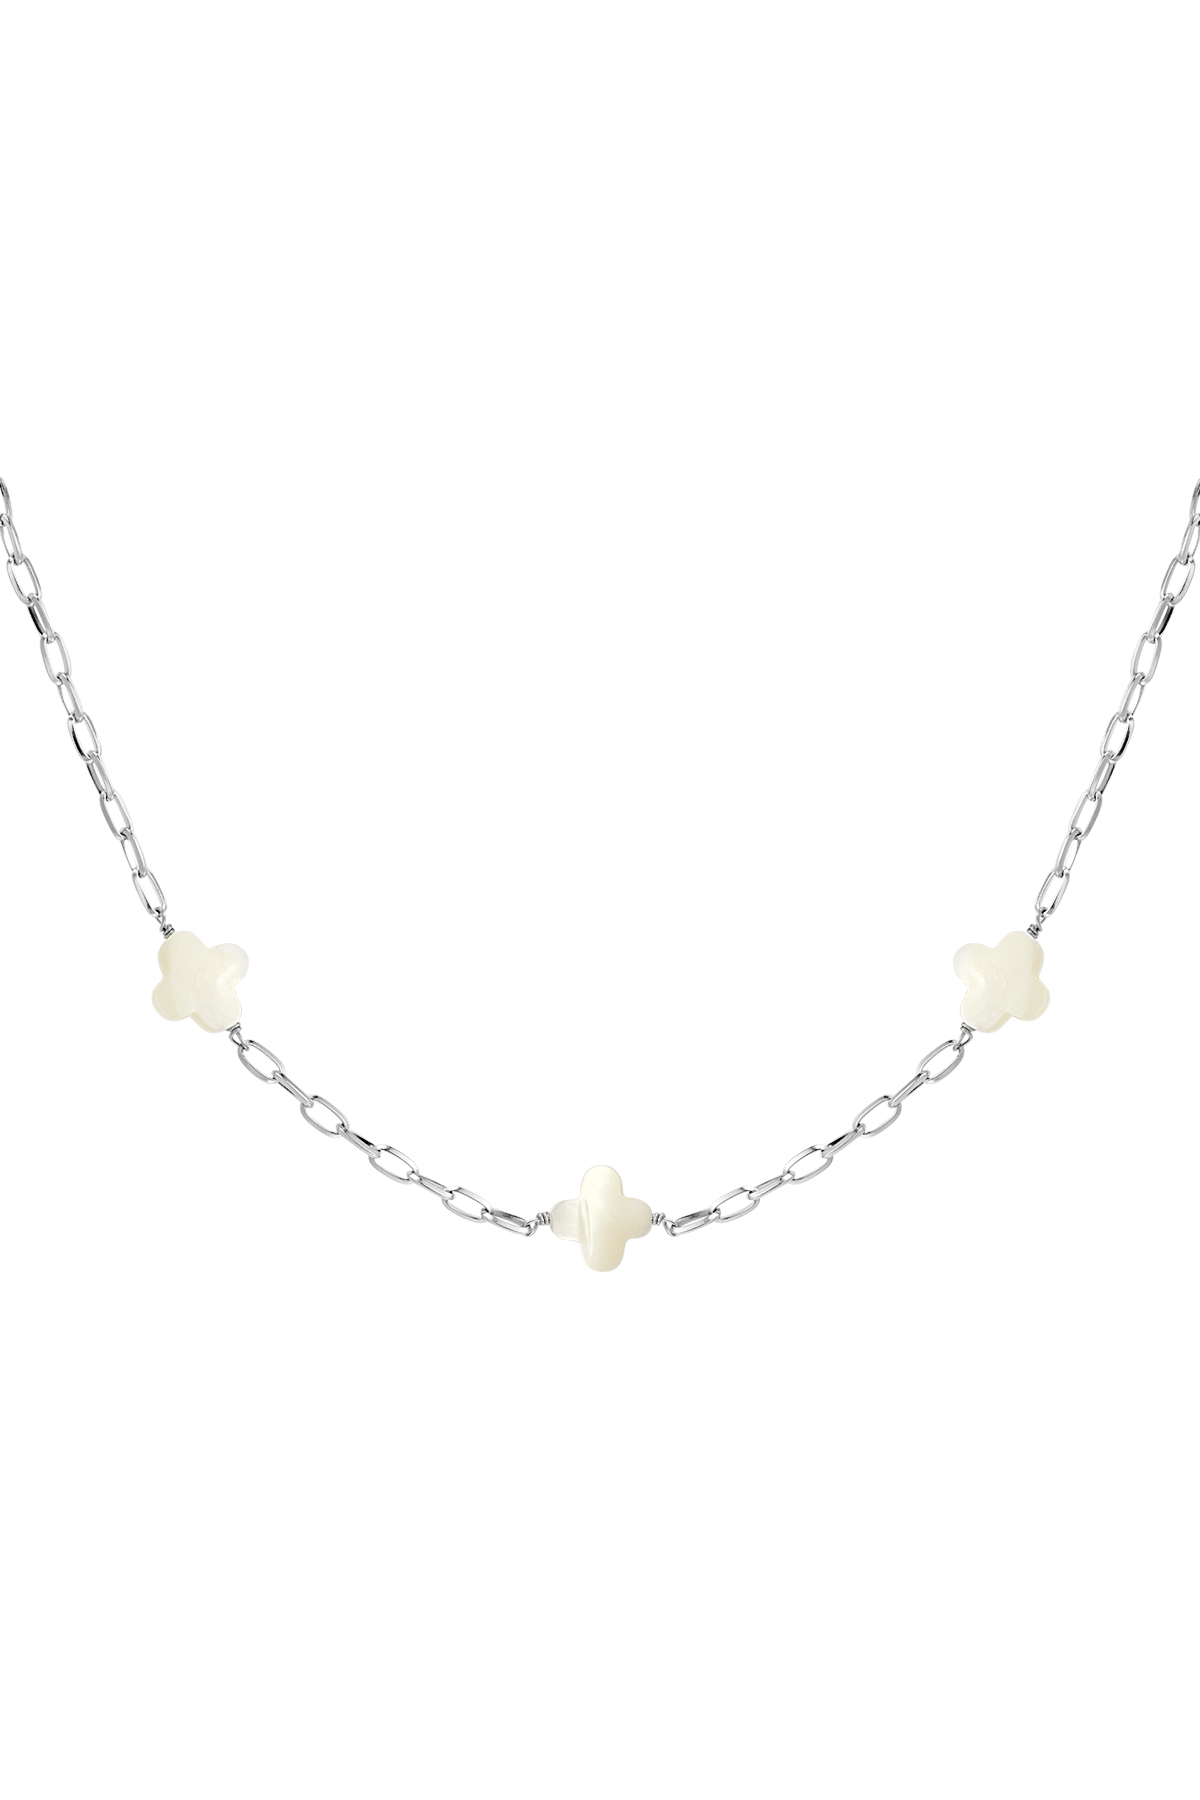 Necklace seashell clovers - Silver Stainless Steel